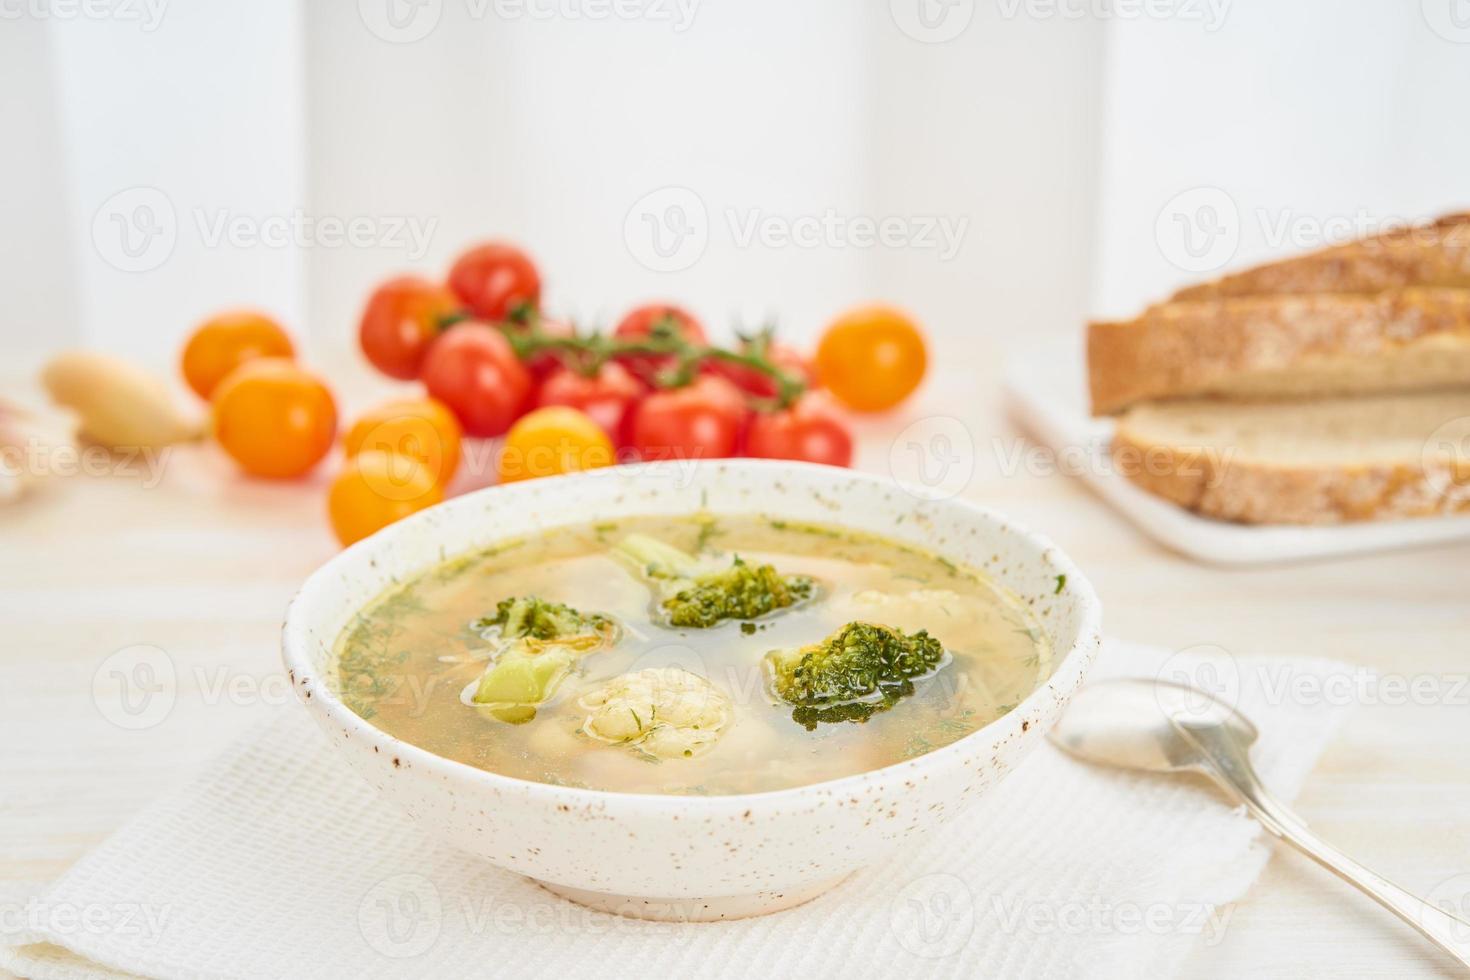 Broccoli soup, healthy spring vegetable dietary vegetarian dish, top view, close up, side view photo